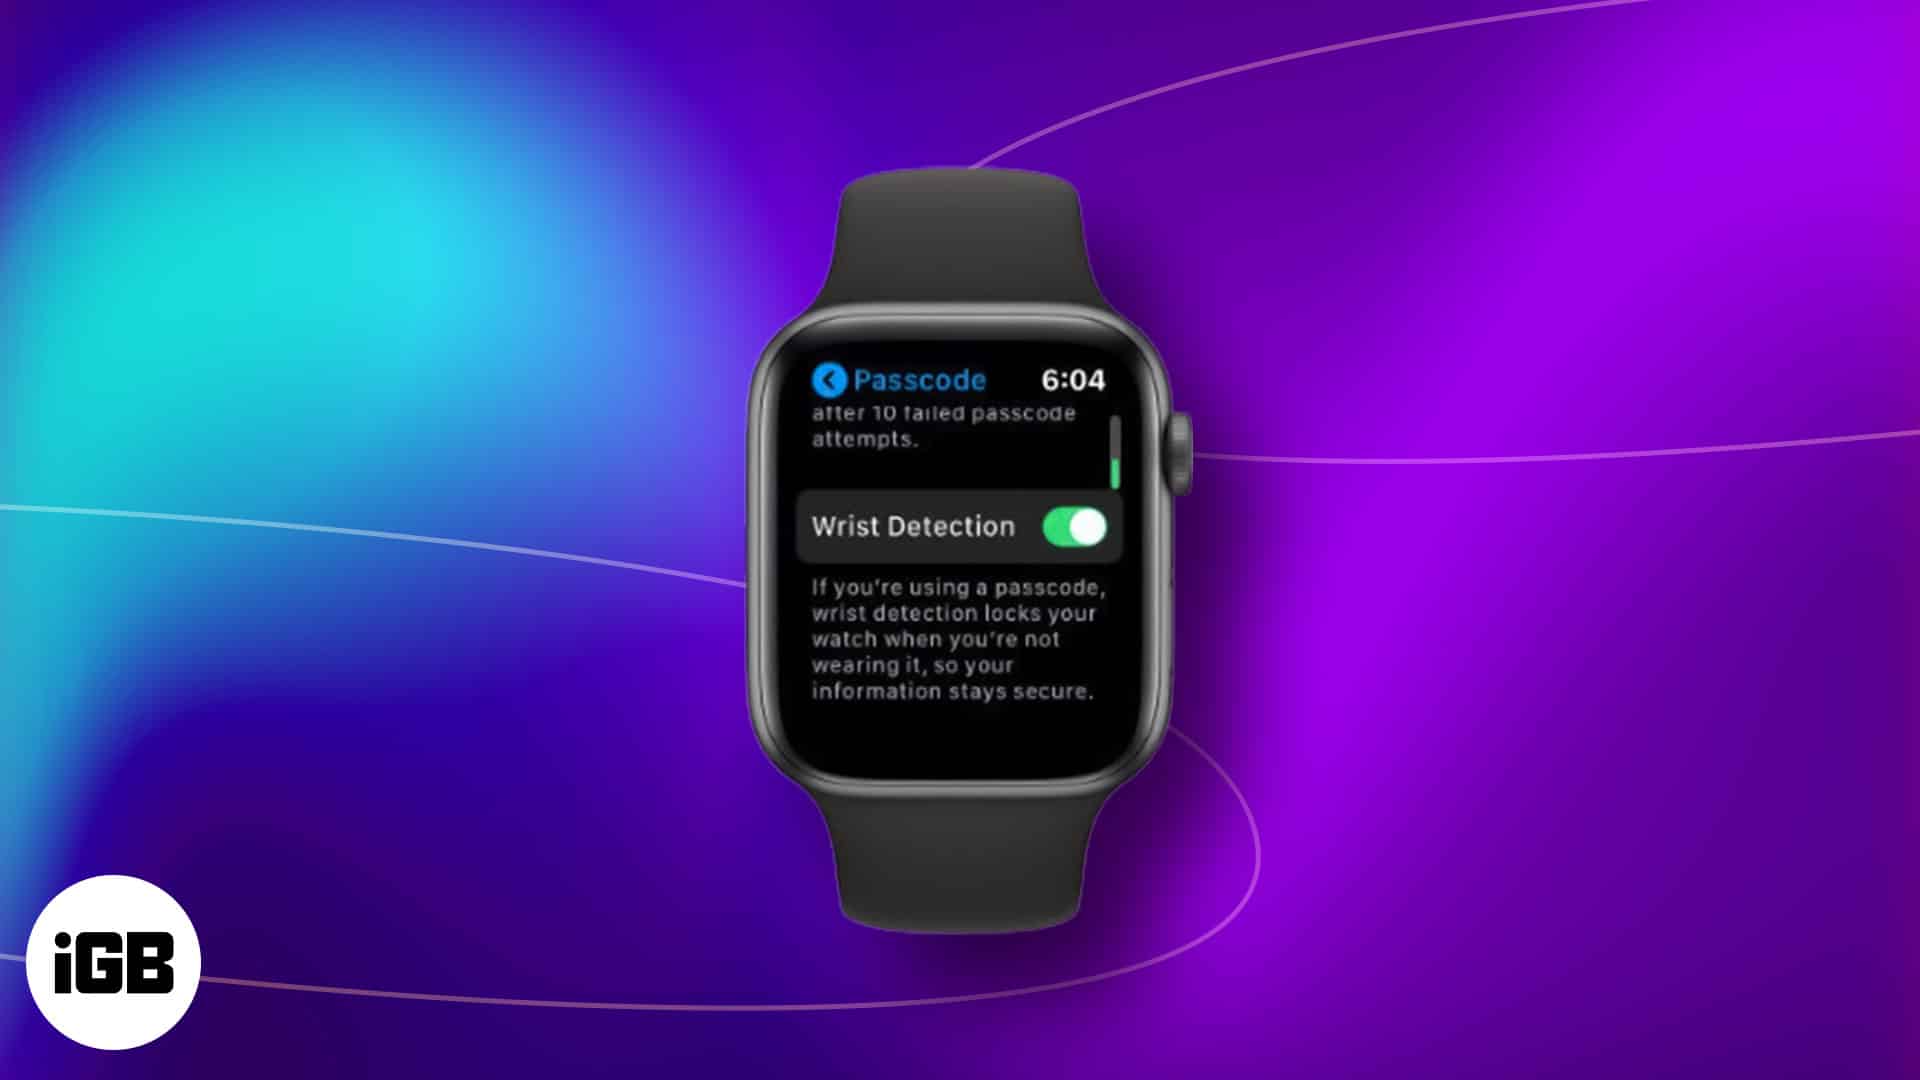 How to enable or disable Wrist Detection on Apple Watch